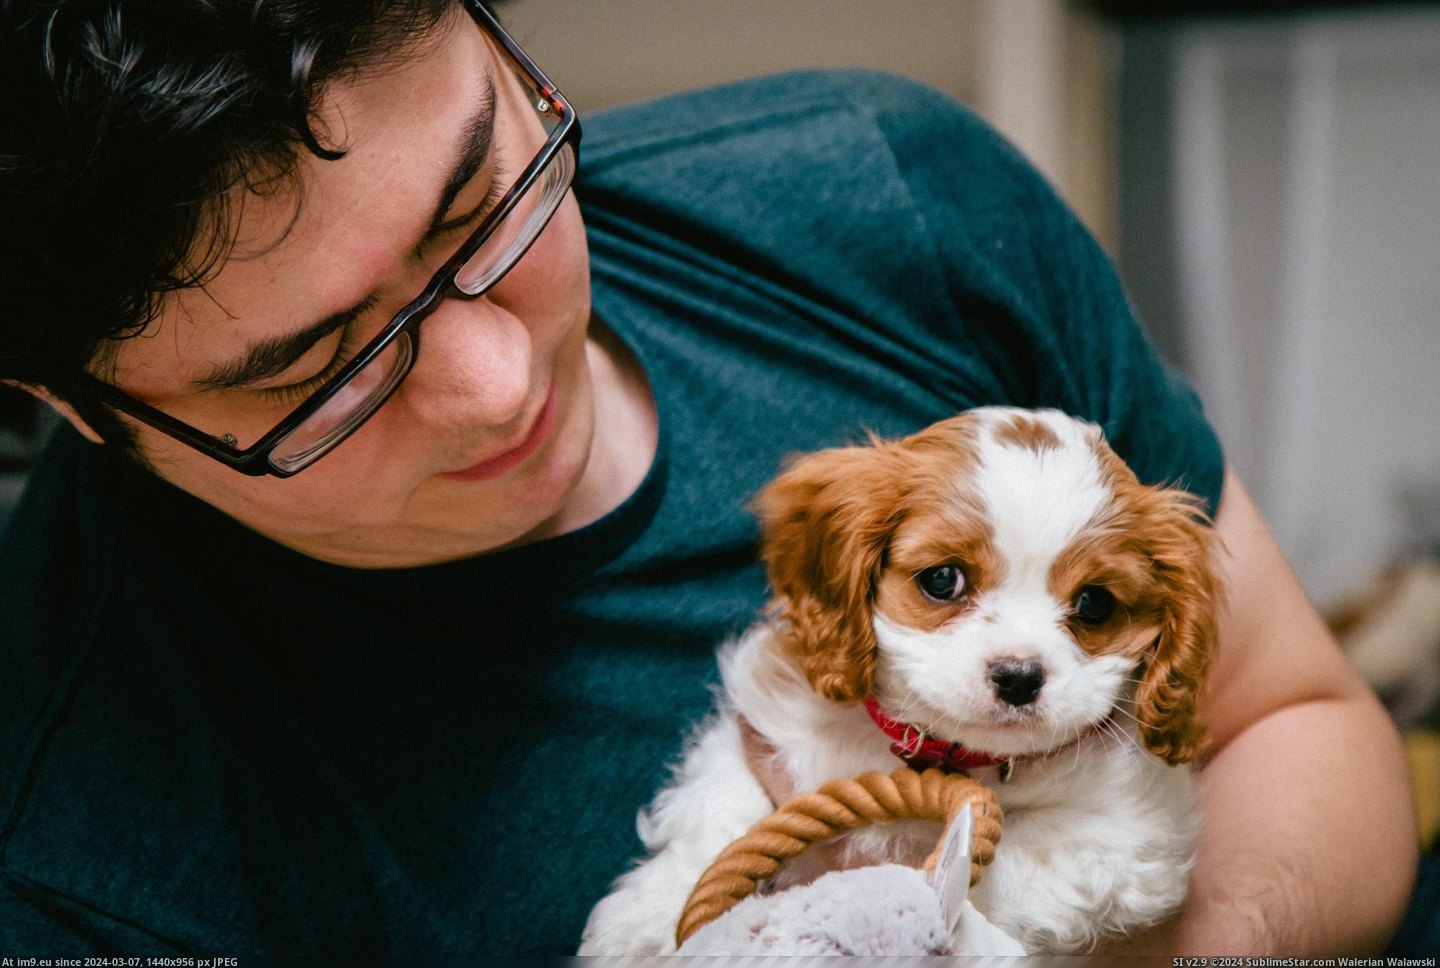 #Old #New #She #Our #Nami #Cavalier #Spaniel #Week #King #Say #Charles [Aww] Please say hello to Nami! She's our new 8-week old Cavalier King Charles Spaniel. 9 Pic. (Изображение из альбом My r/AWW favs))